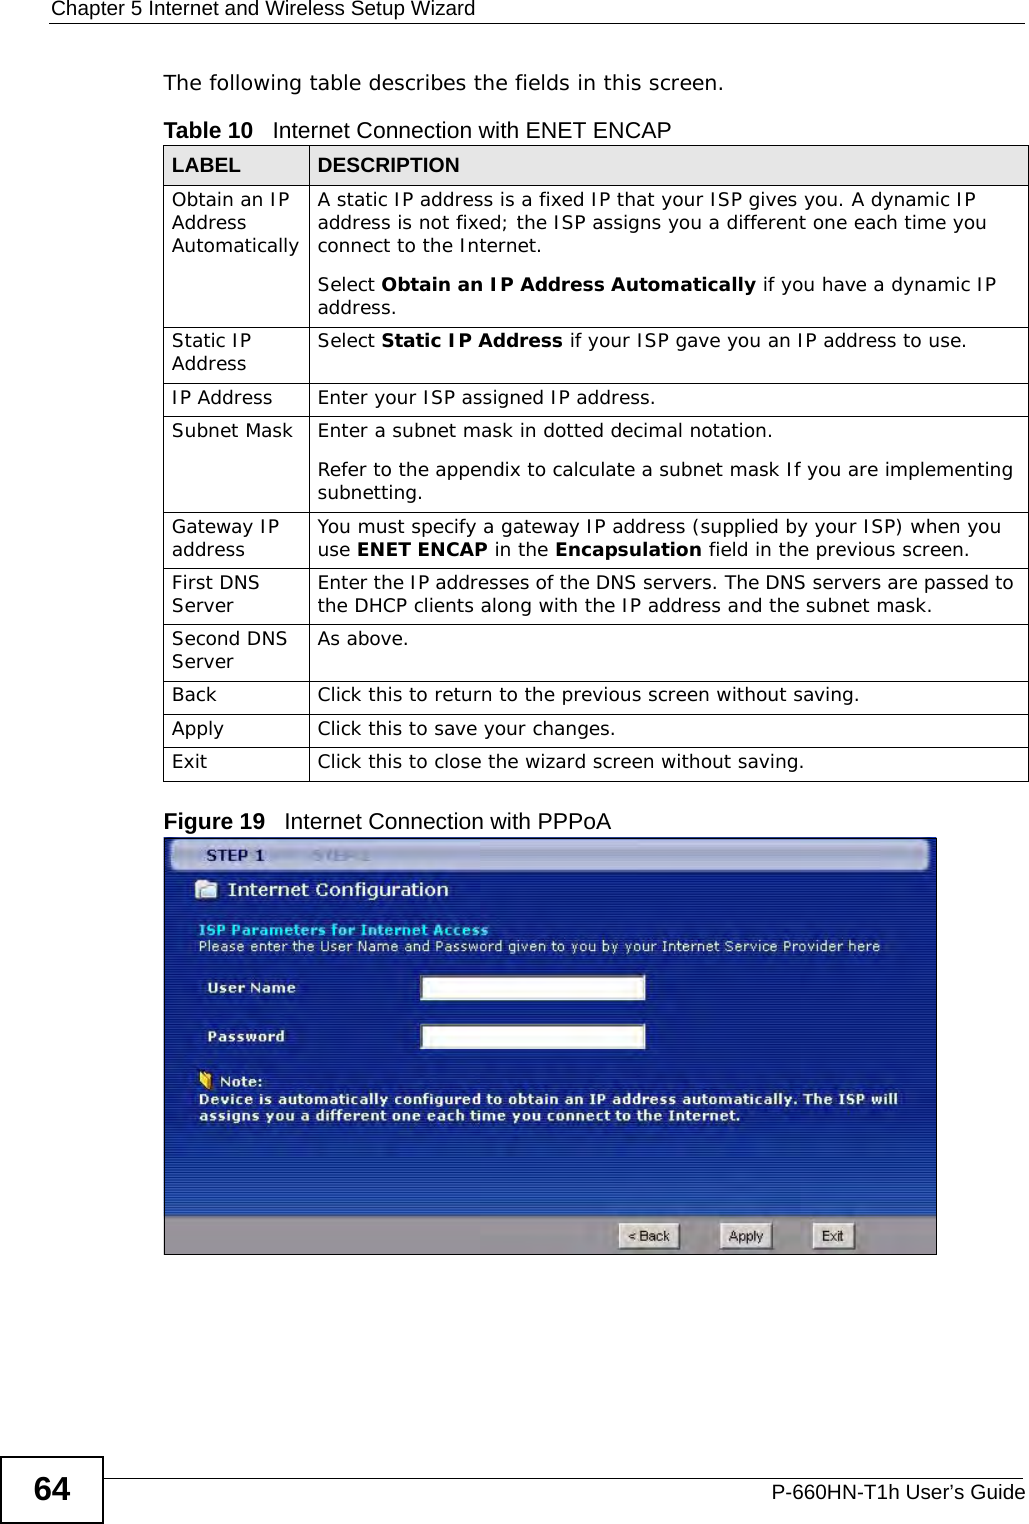 Chapter 5 Internet and Wireless Setup WizardP-660HN-T1h User’s Guide64The following table describes the fields in this screen.Figure 19   Internet Connection with PPPoATable 10   Internet Connection with ENET ENCAPLABEL DESCRIPTIONObtain an IP Address AutomaticallyA static IP address is a fixed IP that your ISP gives you. A dynamic IP address is not fixed; the ISP assigns you a different one each time you connect to the Internet.Select Obtain an IP Address Automatically if you have a dynamic IP address.Static IP Address Select Static IP Address if your ISP gave you an IP address to use.IP Address Enter your ISP assigned IP address.Subnet Mask Enter a subnet mask in dotted decimal notation. Refer to the appendix to calculate a subnet mask If you are implementing subnetting.Gateway IP address You must specify a gateway IP address (supplied by your ISP) when you use ENET ENCAP in the Encapsulation field in the previous screen.First DNS Server Enter the IP addresses of the DNS servers. The DNS servers are passed to the DHCP clients along with the IP address and the subnet mask.Second DNS Server As above.Back Click this to return to the previous screen without saving.Apply Click this to save your changes.Exit Click this to close the wizard screen without saving.